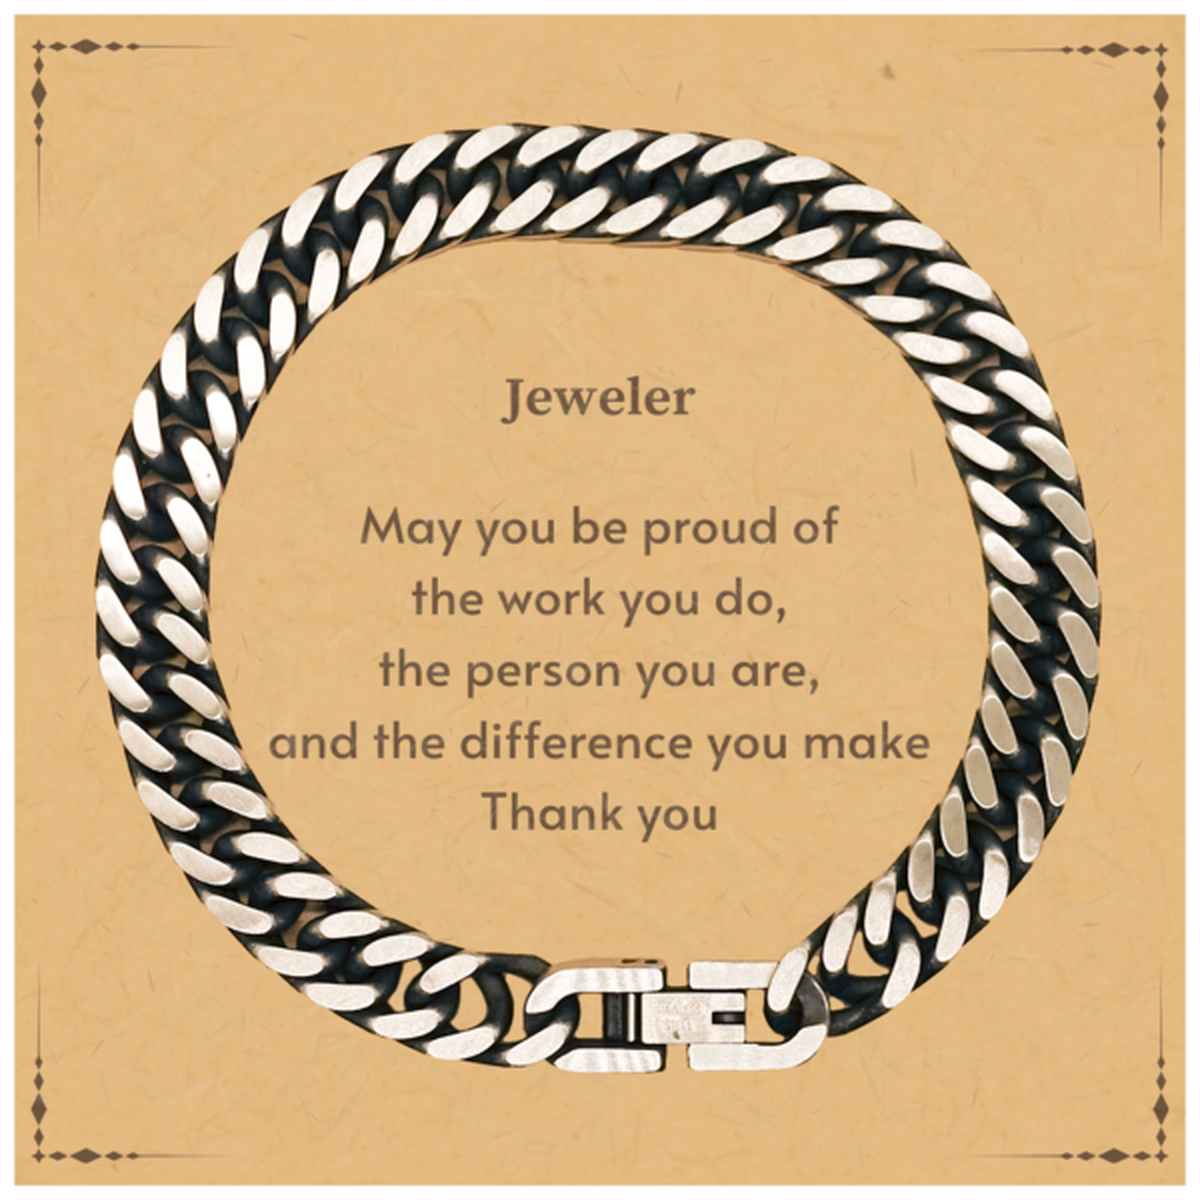 Heartwarming Cuban Link Chain Bracelet Retirement Coworkers Gifts for Jeweler, Jeweler May You be proud of the work you do, the person you are Gifts for Boss Men Women Friends